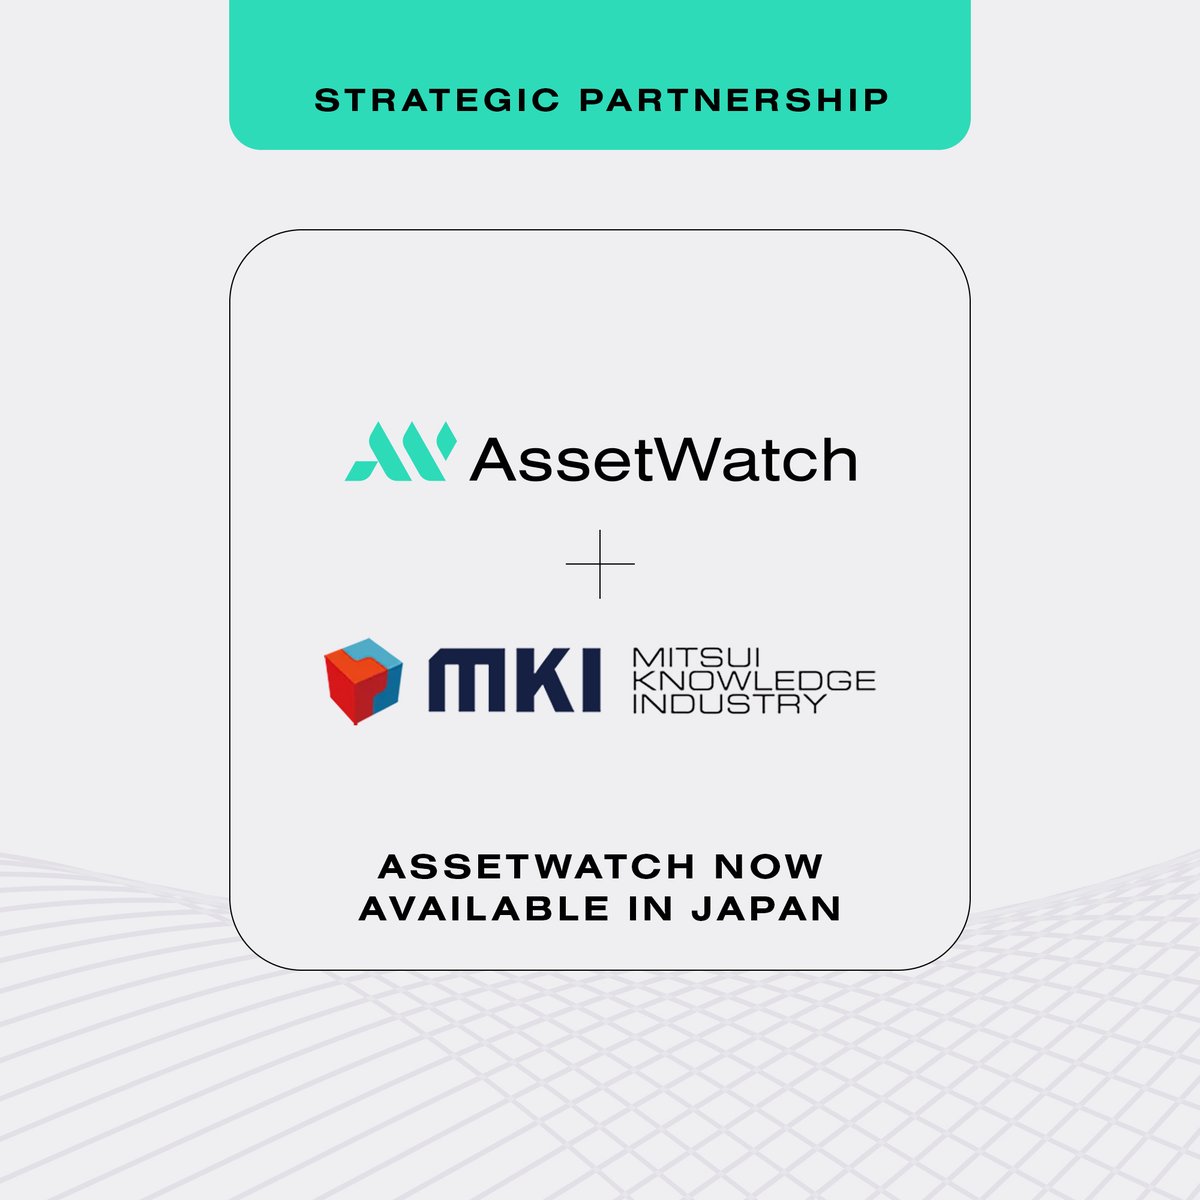 Partnership Announcement! AssetWatch & Mitsui Knowledge Industry will be partnering to deliver advanced maintenance solutions in Japan. Check out the release here: hubs.li/Q02rjJJg0 #partnership #AssetWatch #MitsuiKnowledgeIndustry #MKI #news